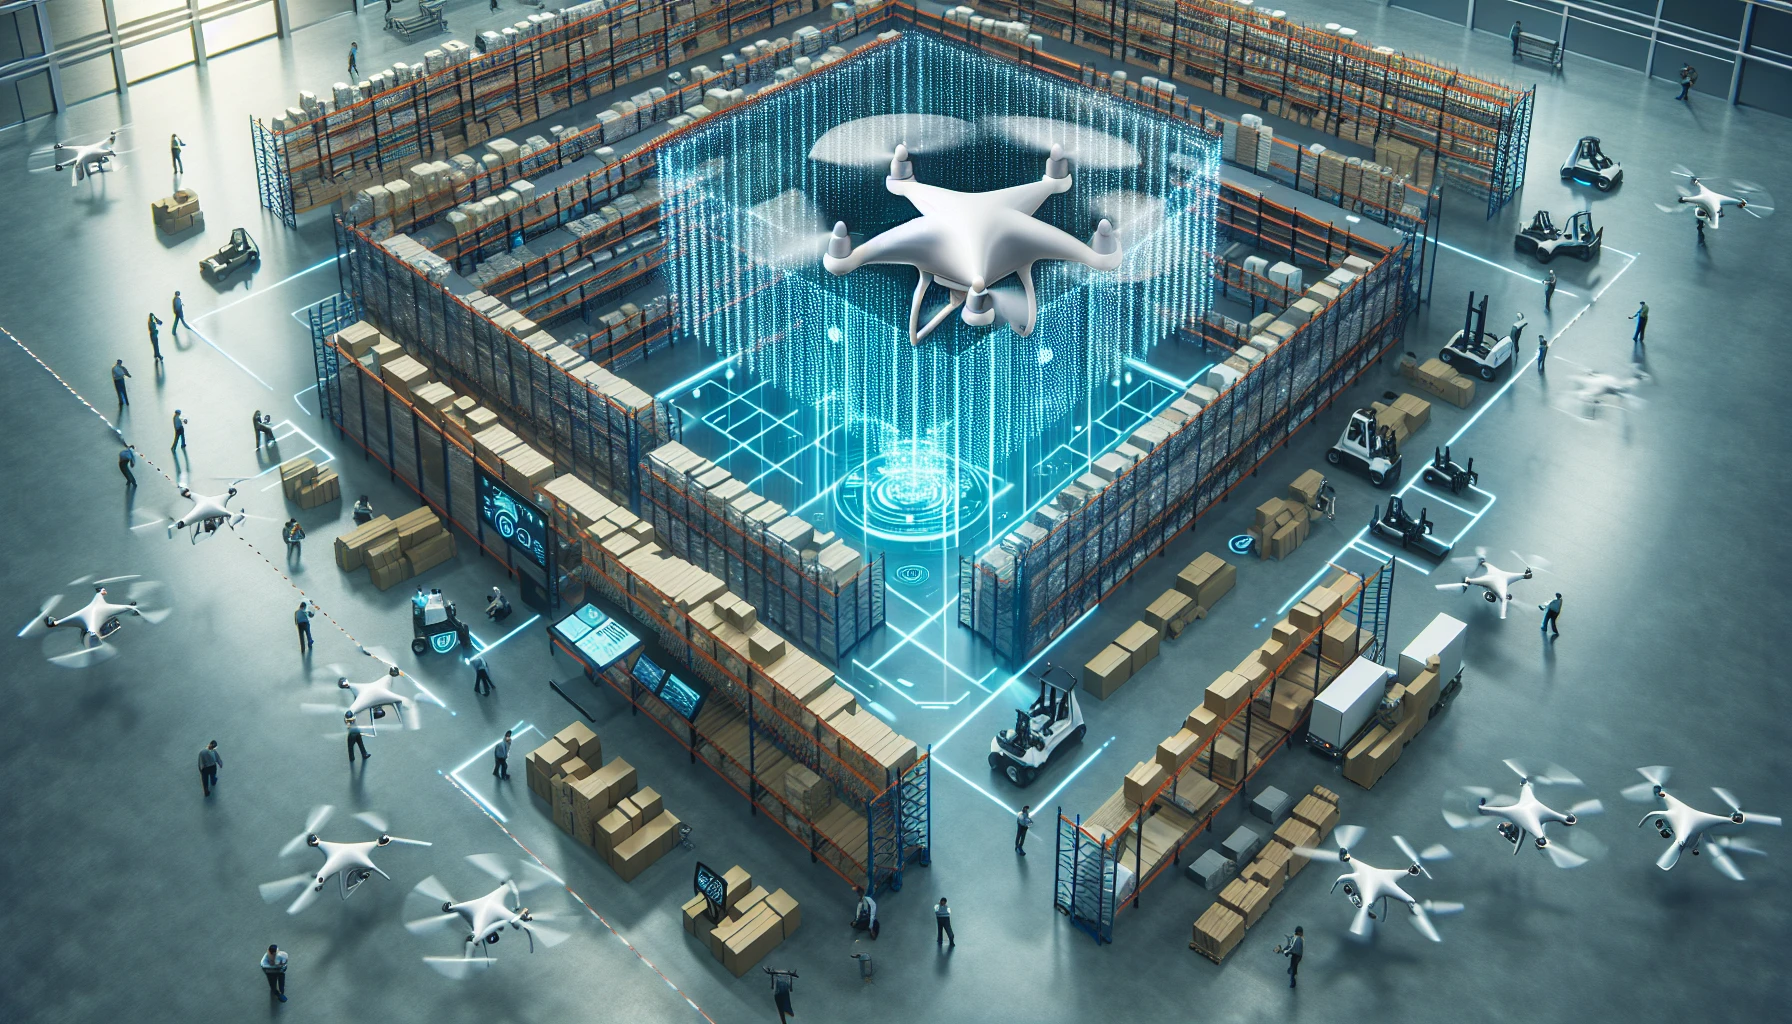 Preventing internal and external threats in distribution centers